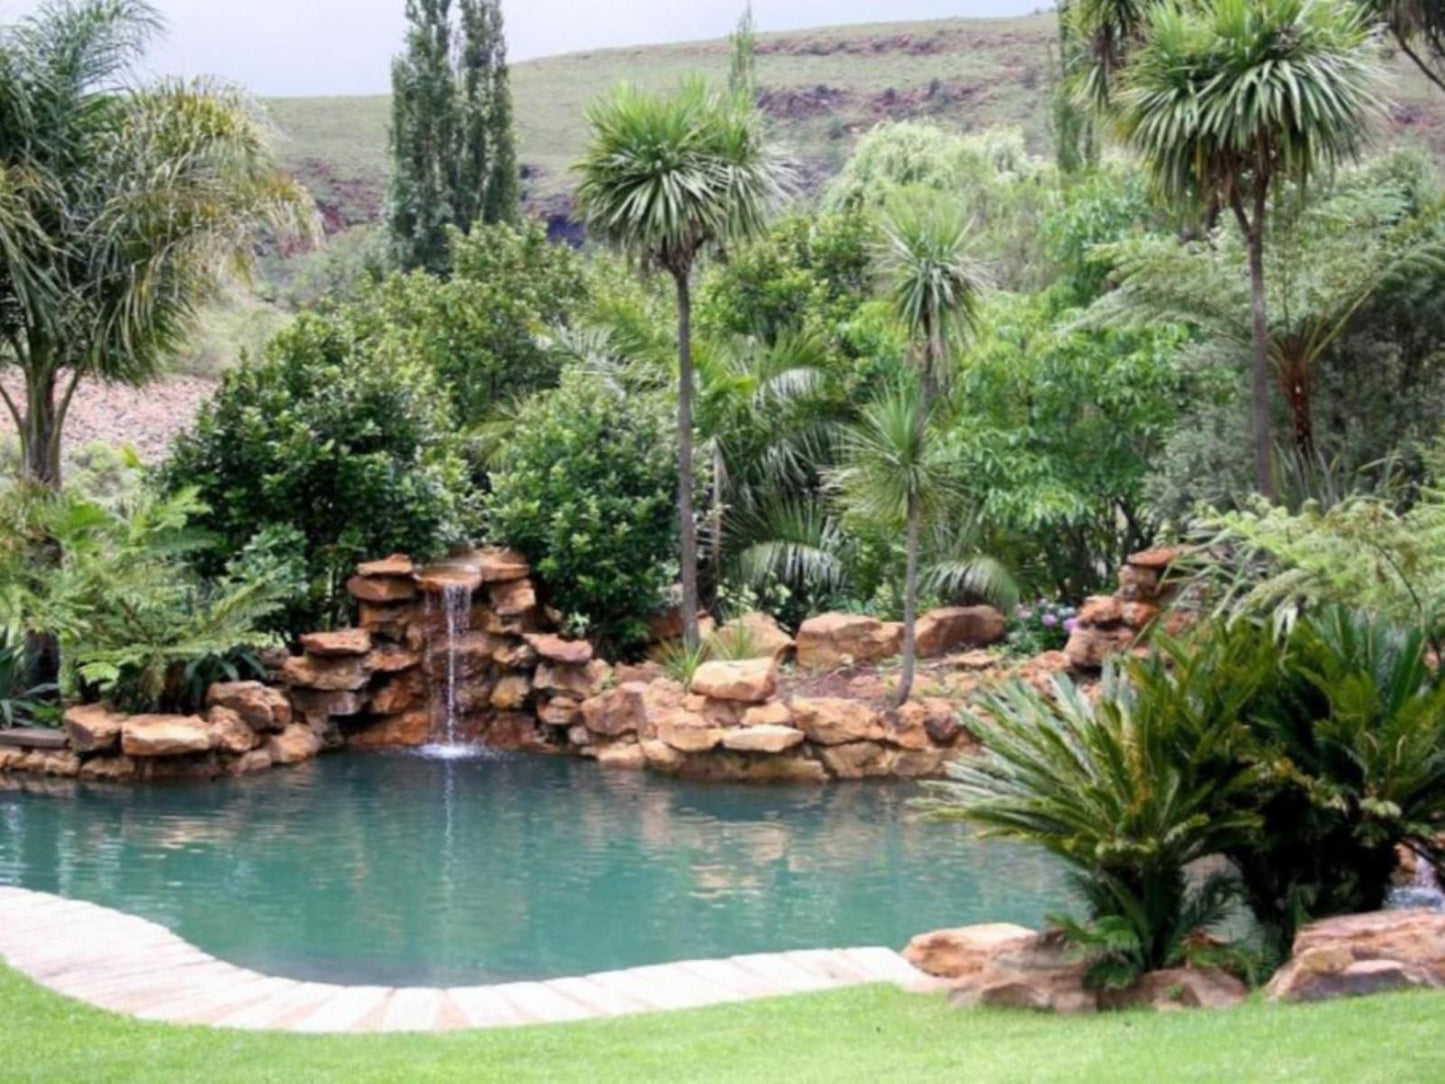 Nooitgedacht Trout Lodge Lydenburg Mpumalanga South Africa Garden, Nature, Plant, Swimming Pool